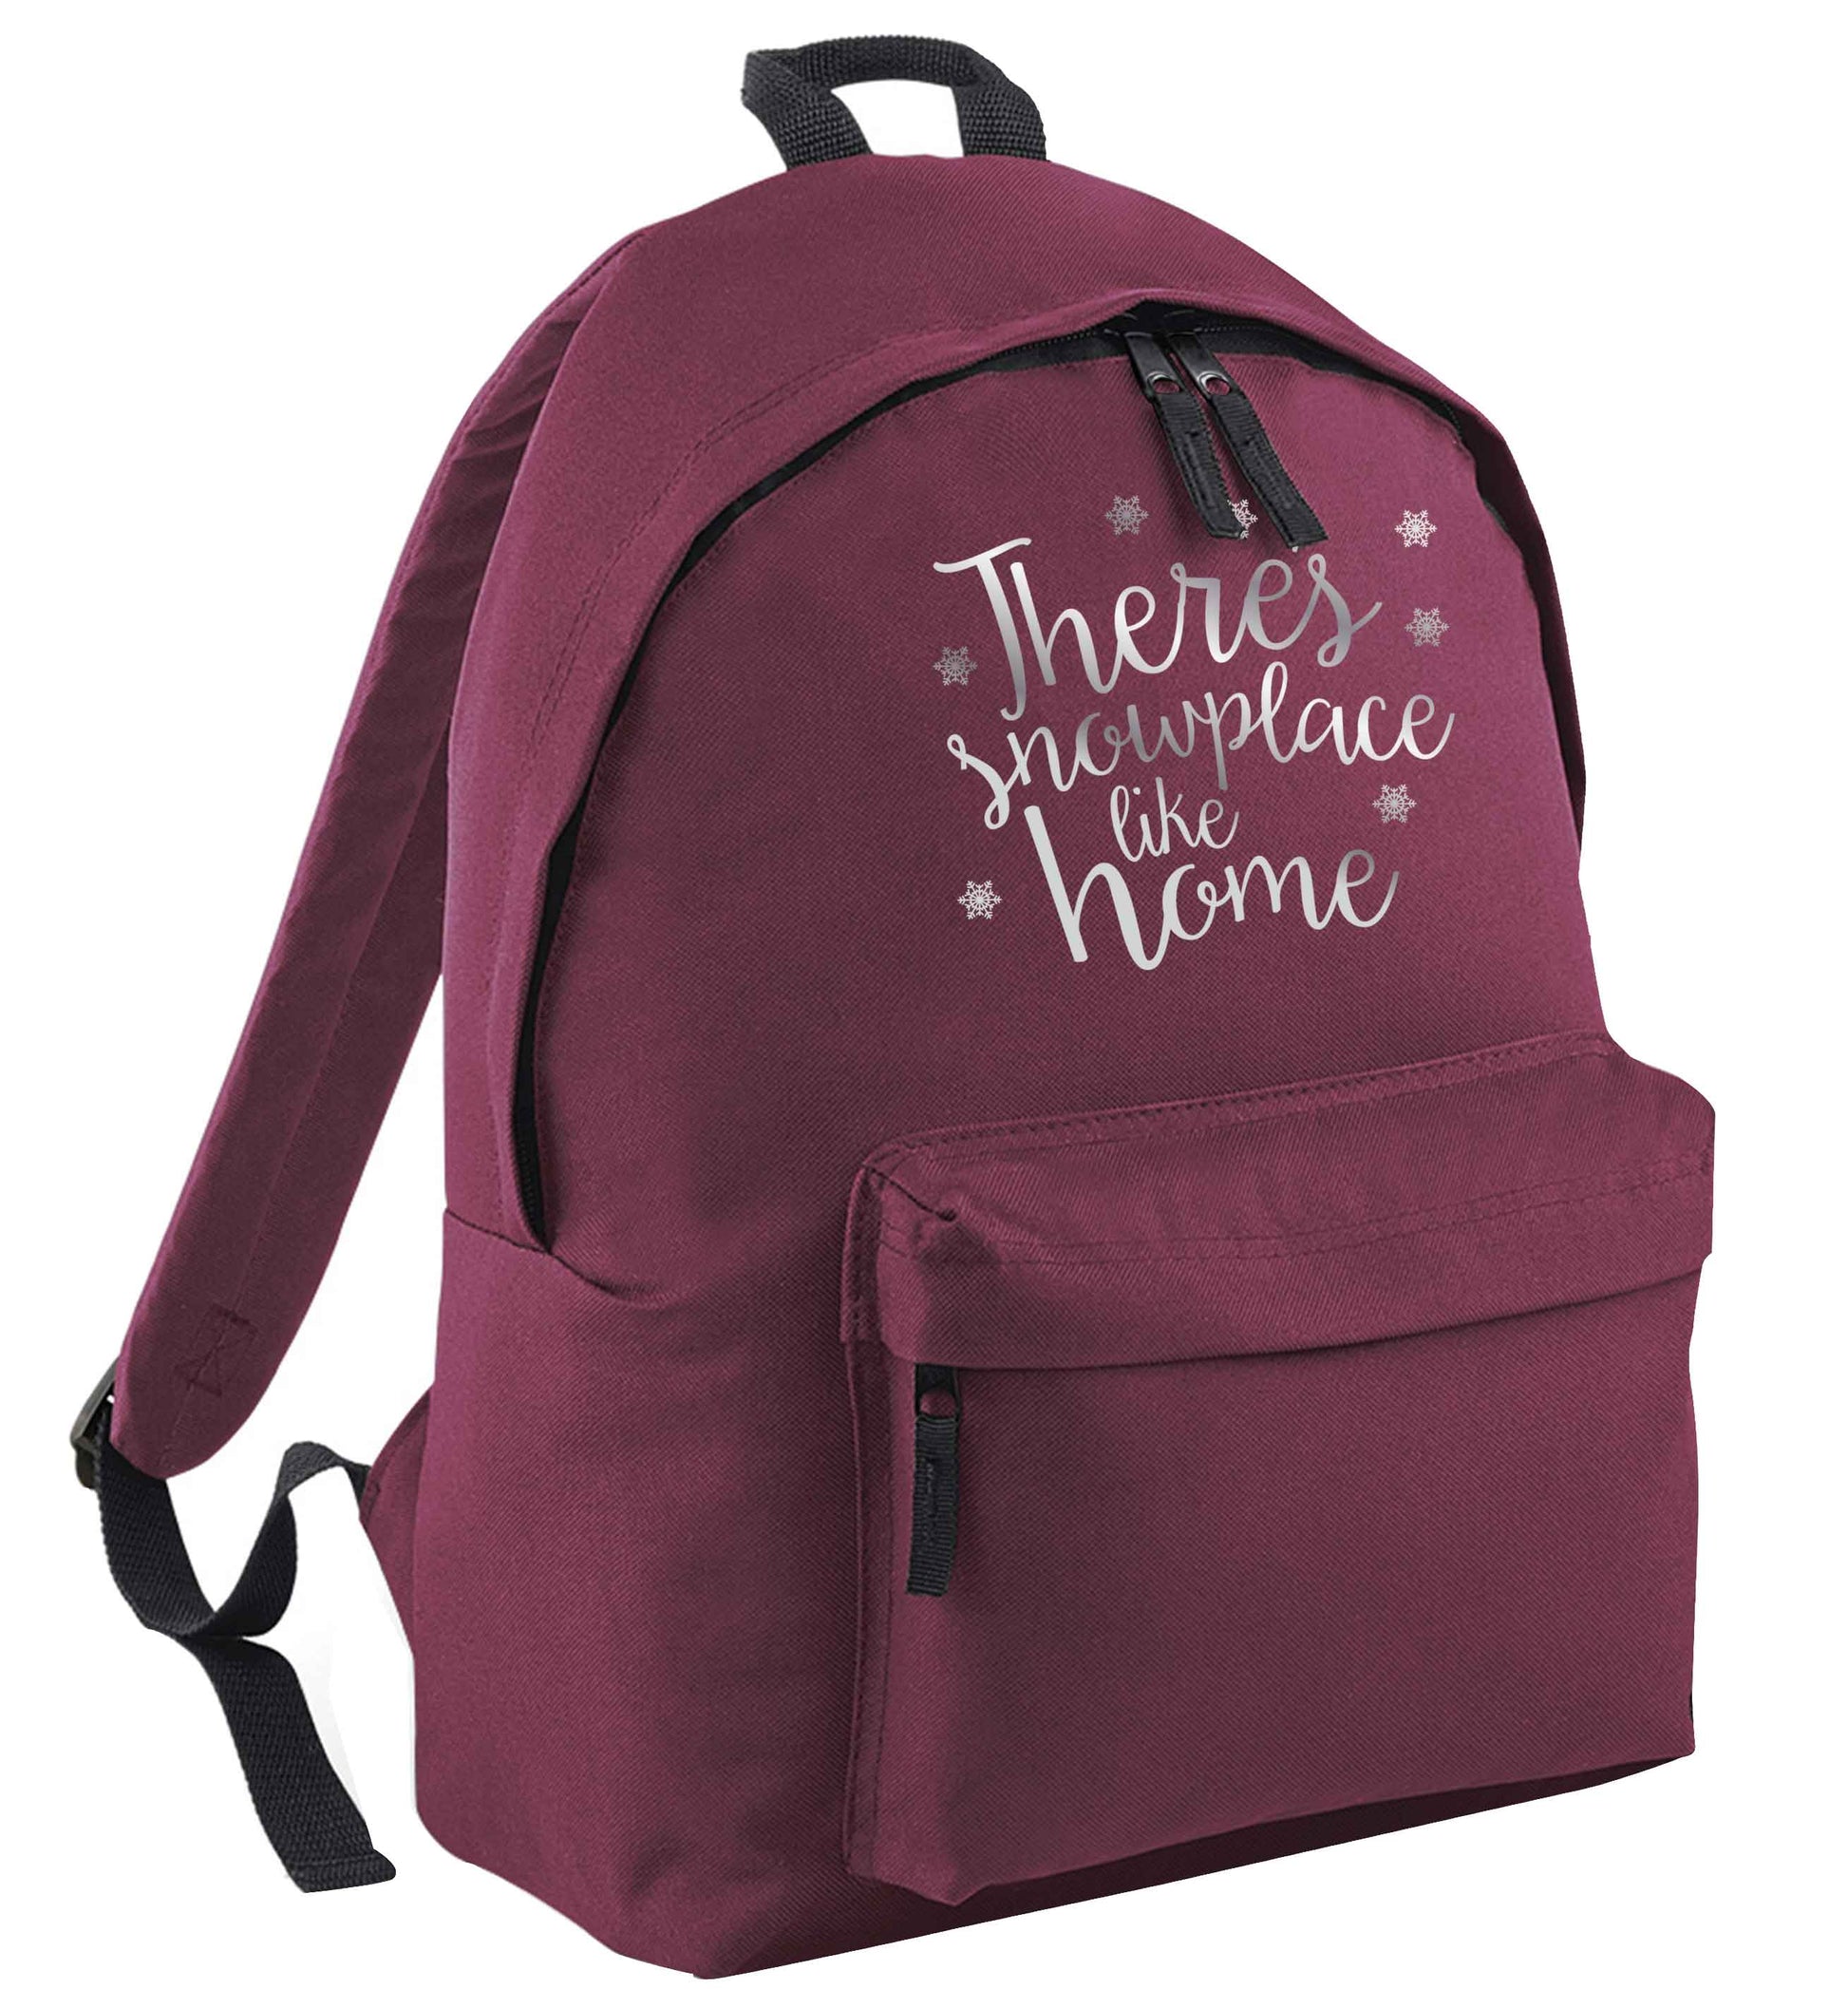 There's snowplace like home - metallic silver black adults backpack